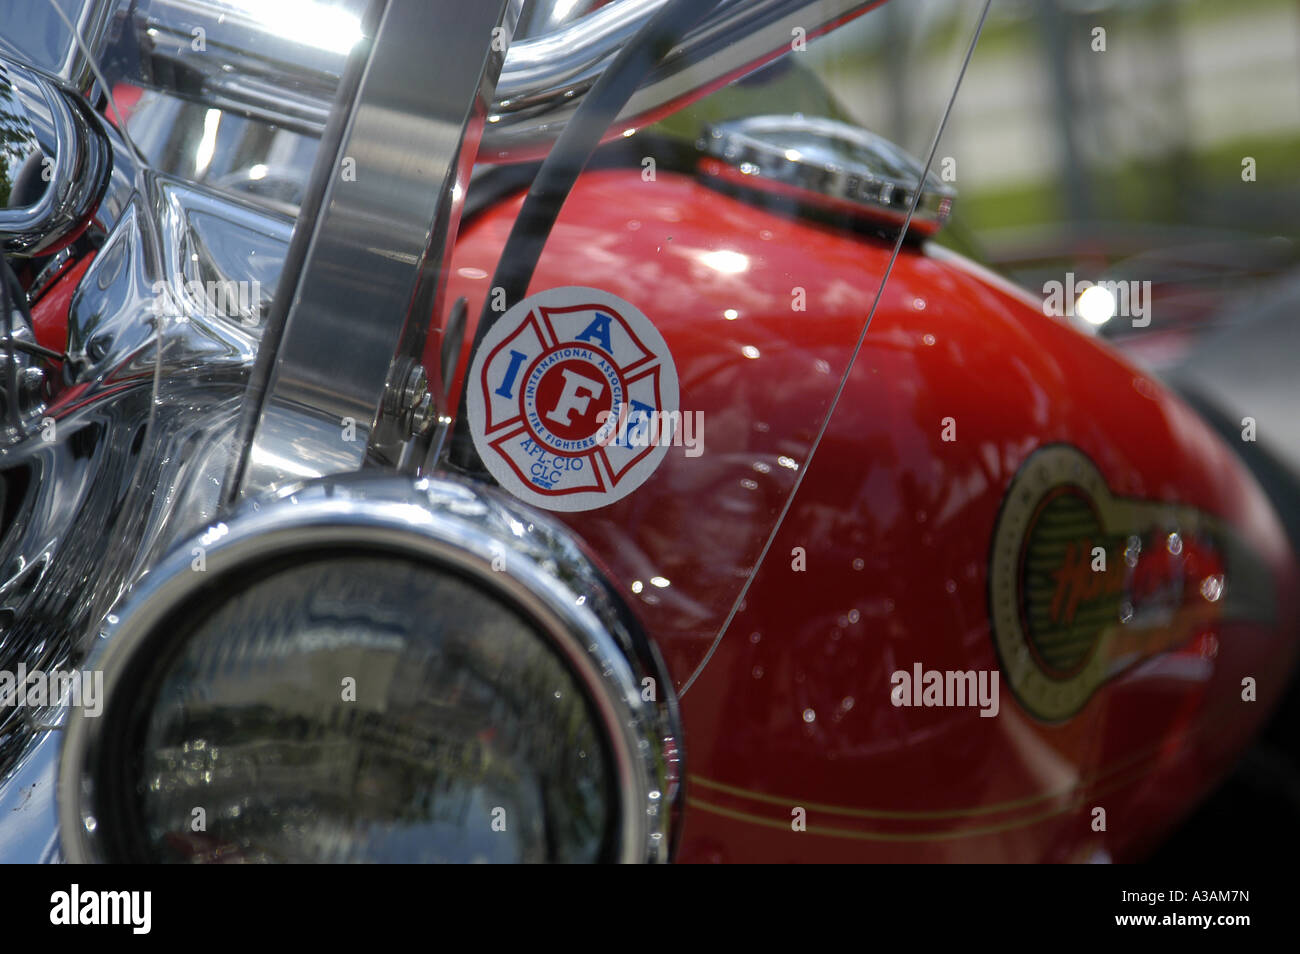 P18 095 Fire Dept Sticker On Motorcycle Stock Photo